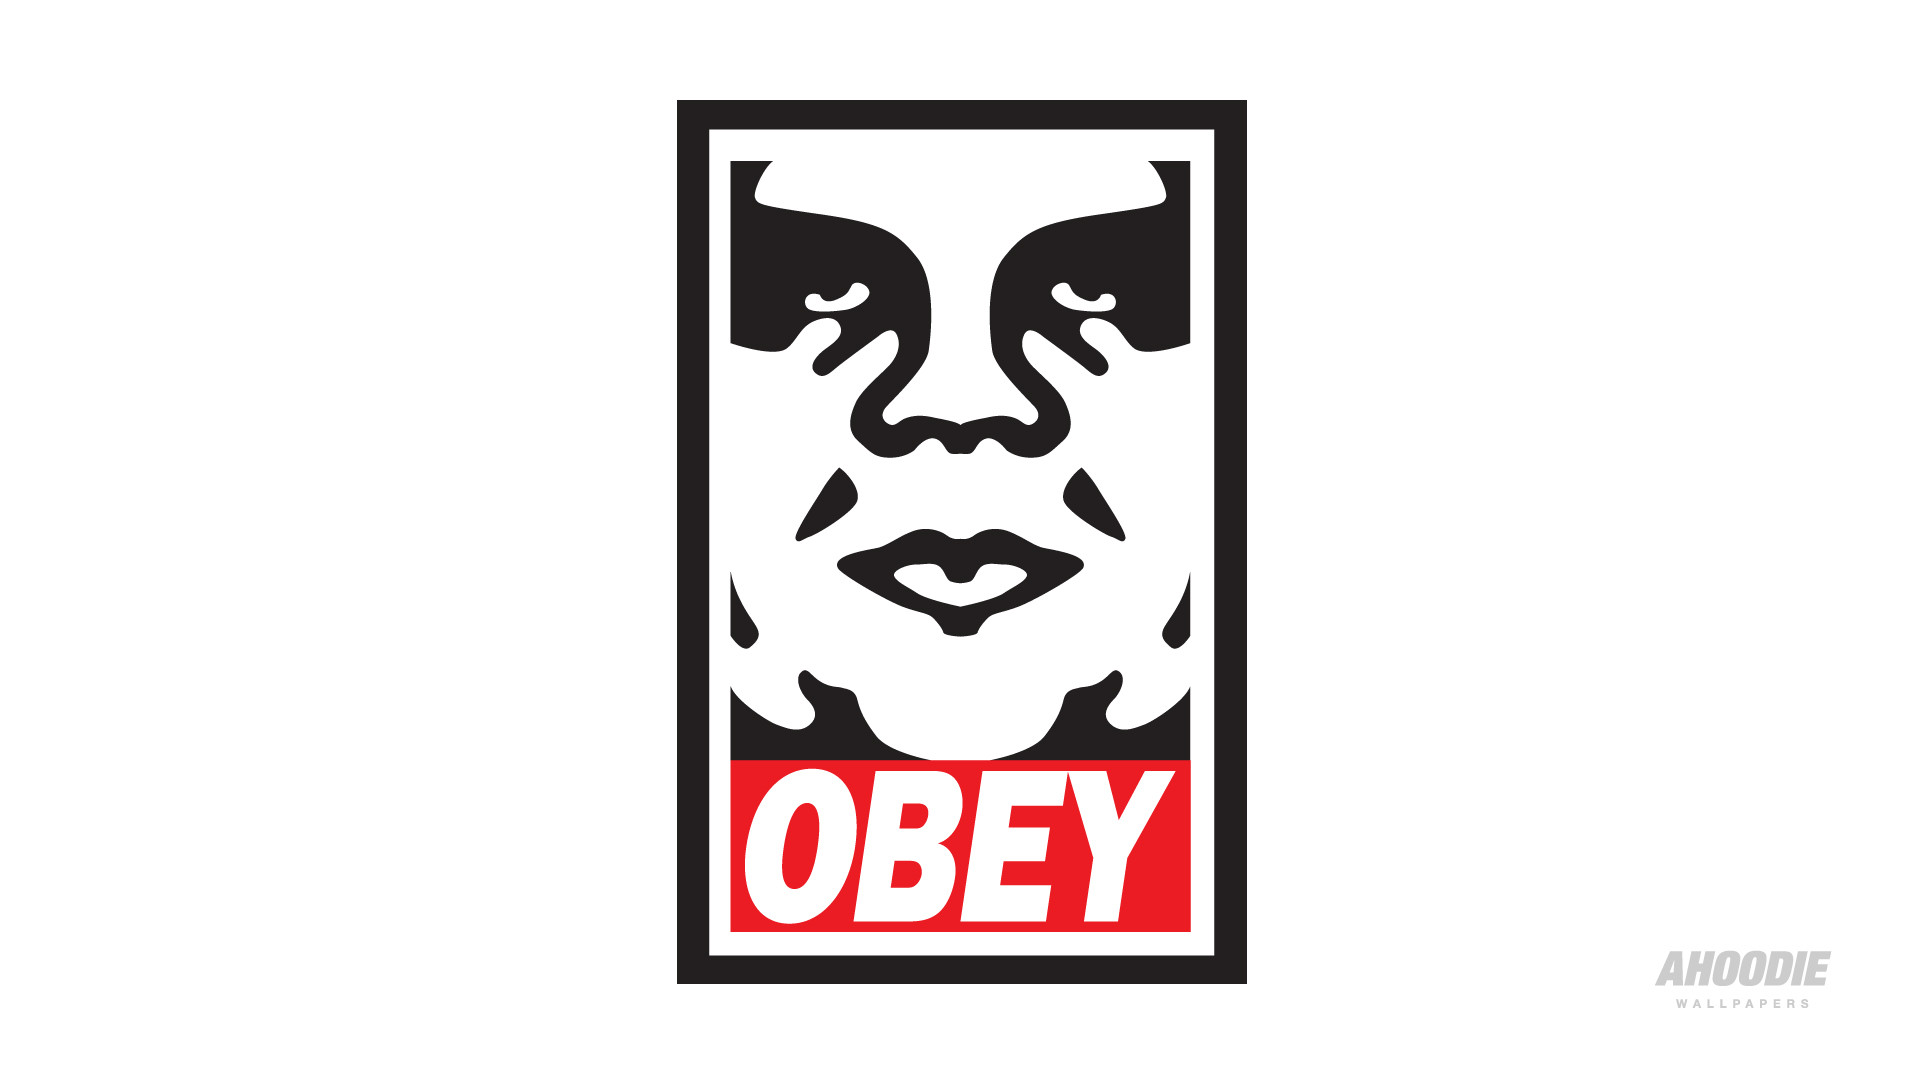 Obey Hd Wallpaper 70 Images HD Wallpapers Download Free Images Wallpaper [wallpaper981.blogspot.com]